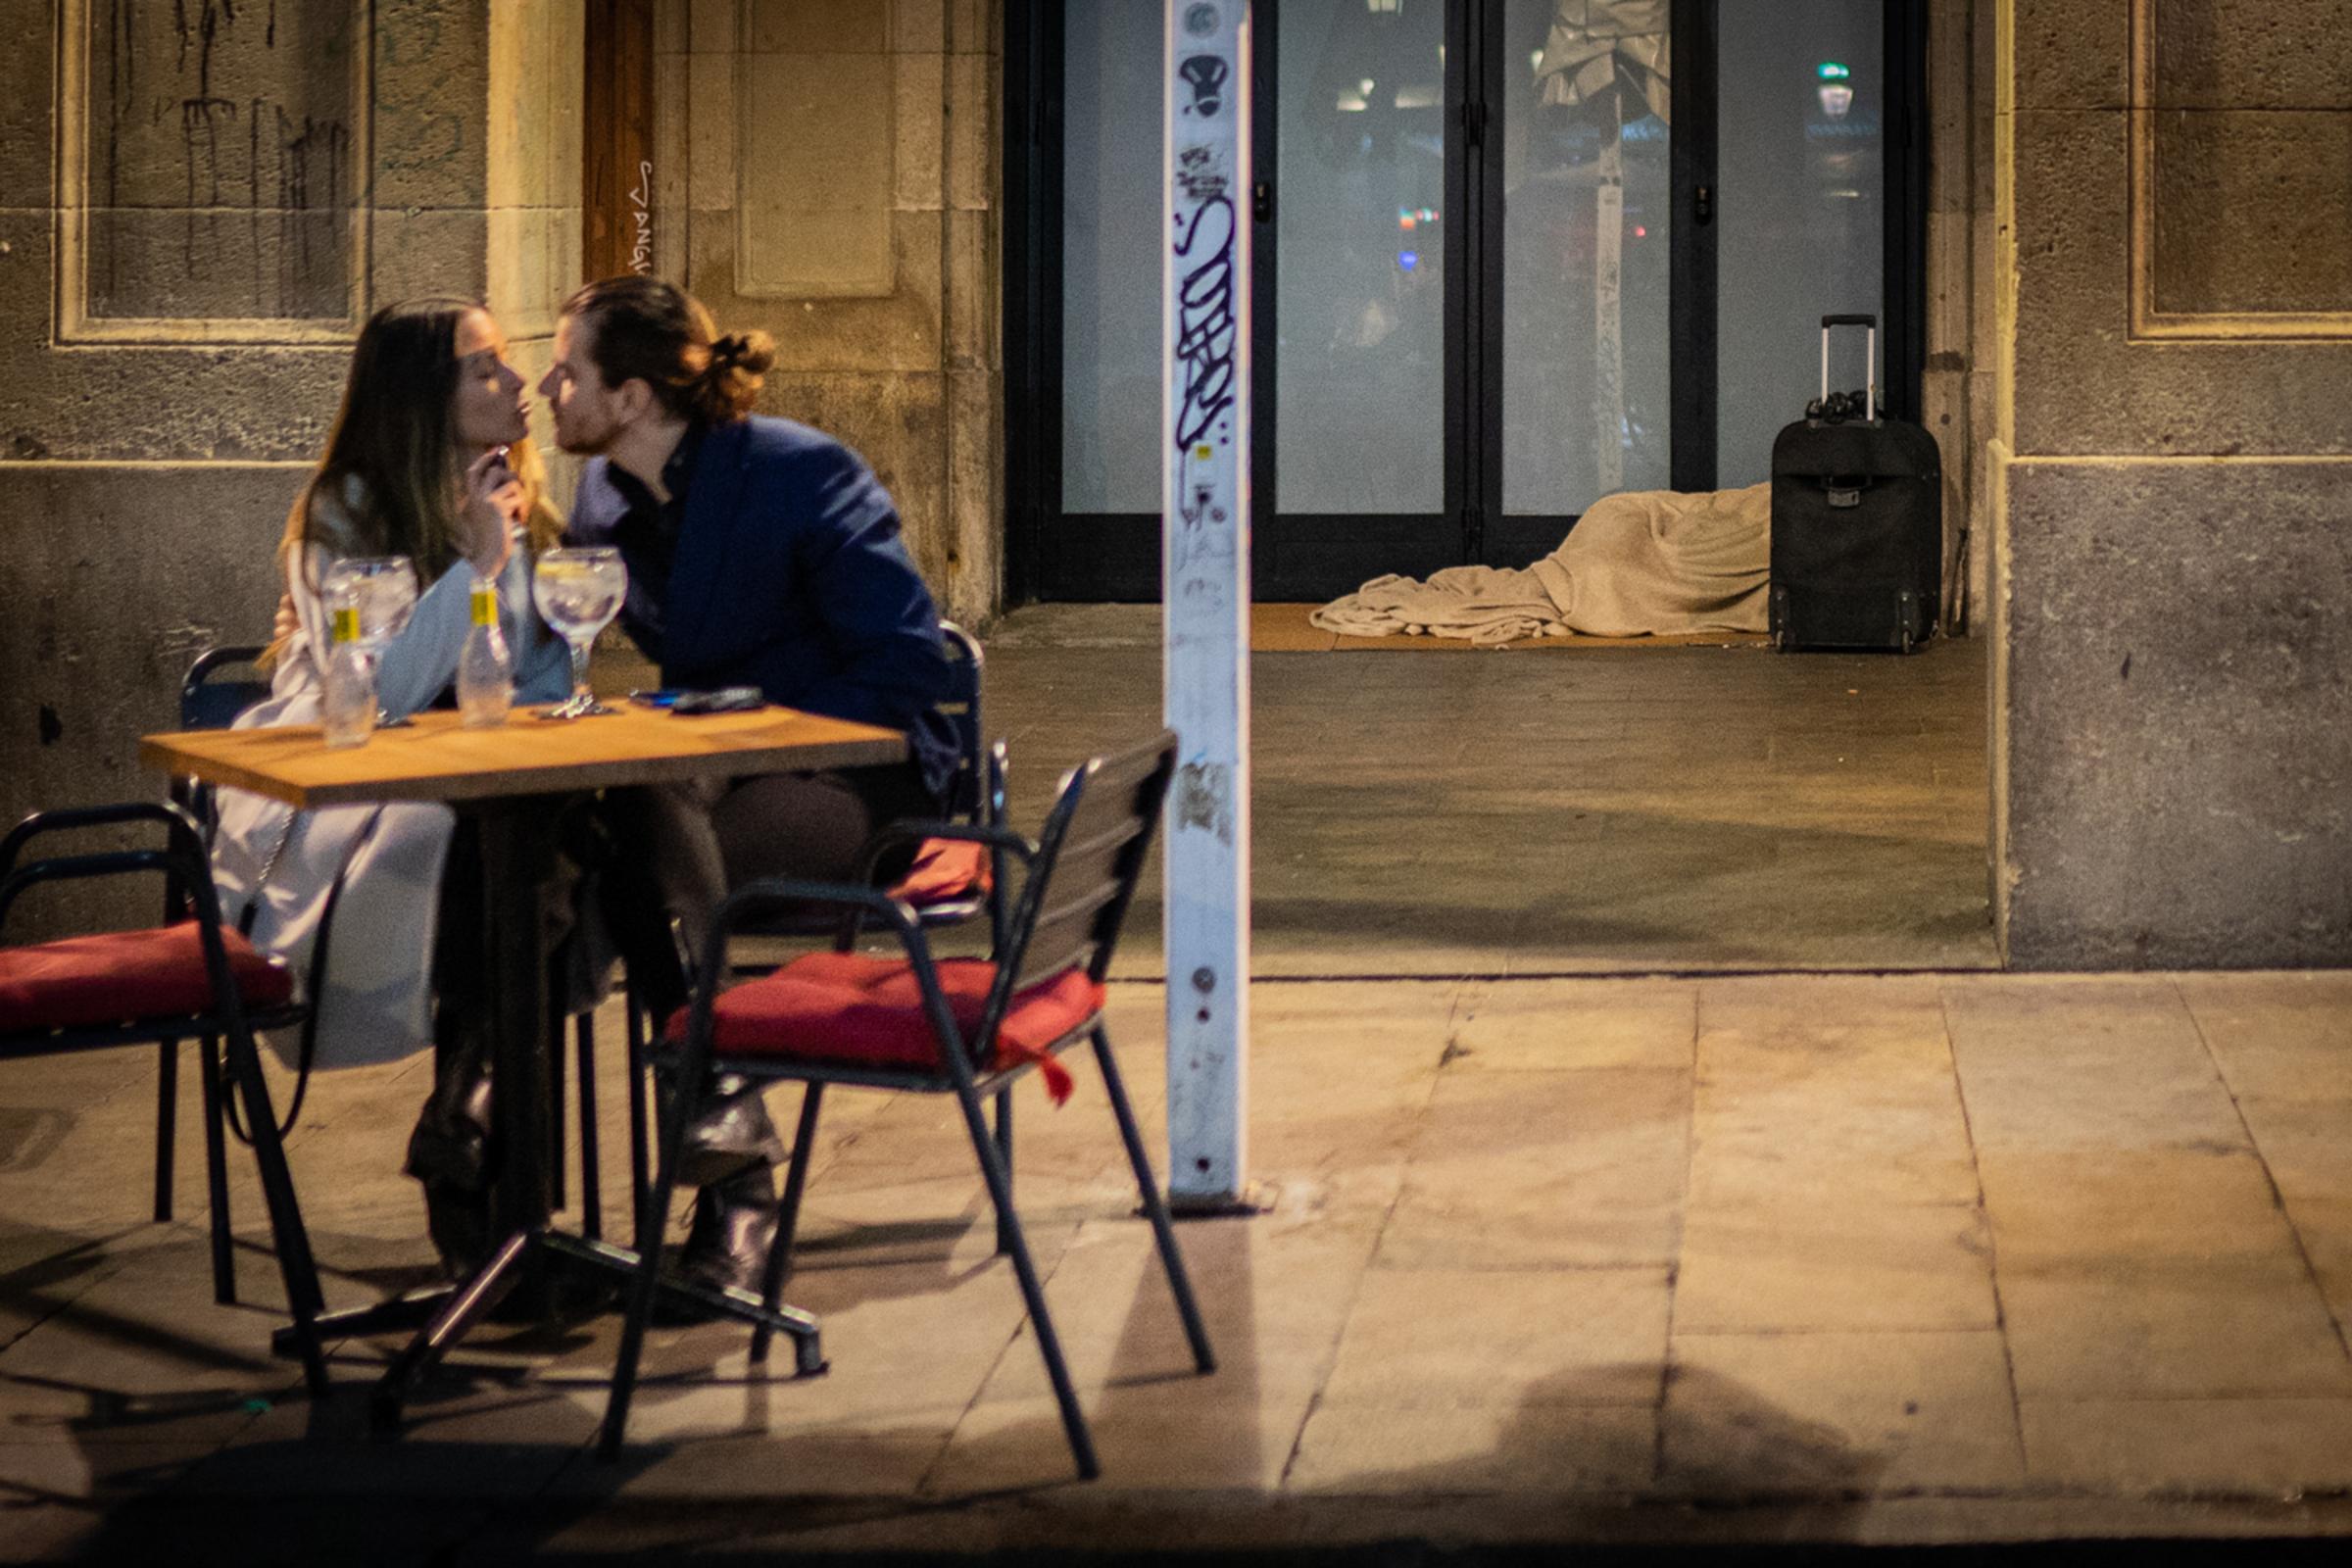 Daily news -  A couple has a drink while a person sleeps in the street...